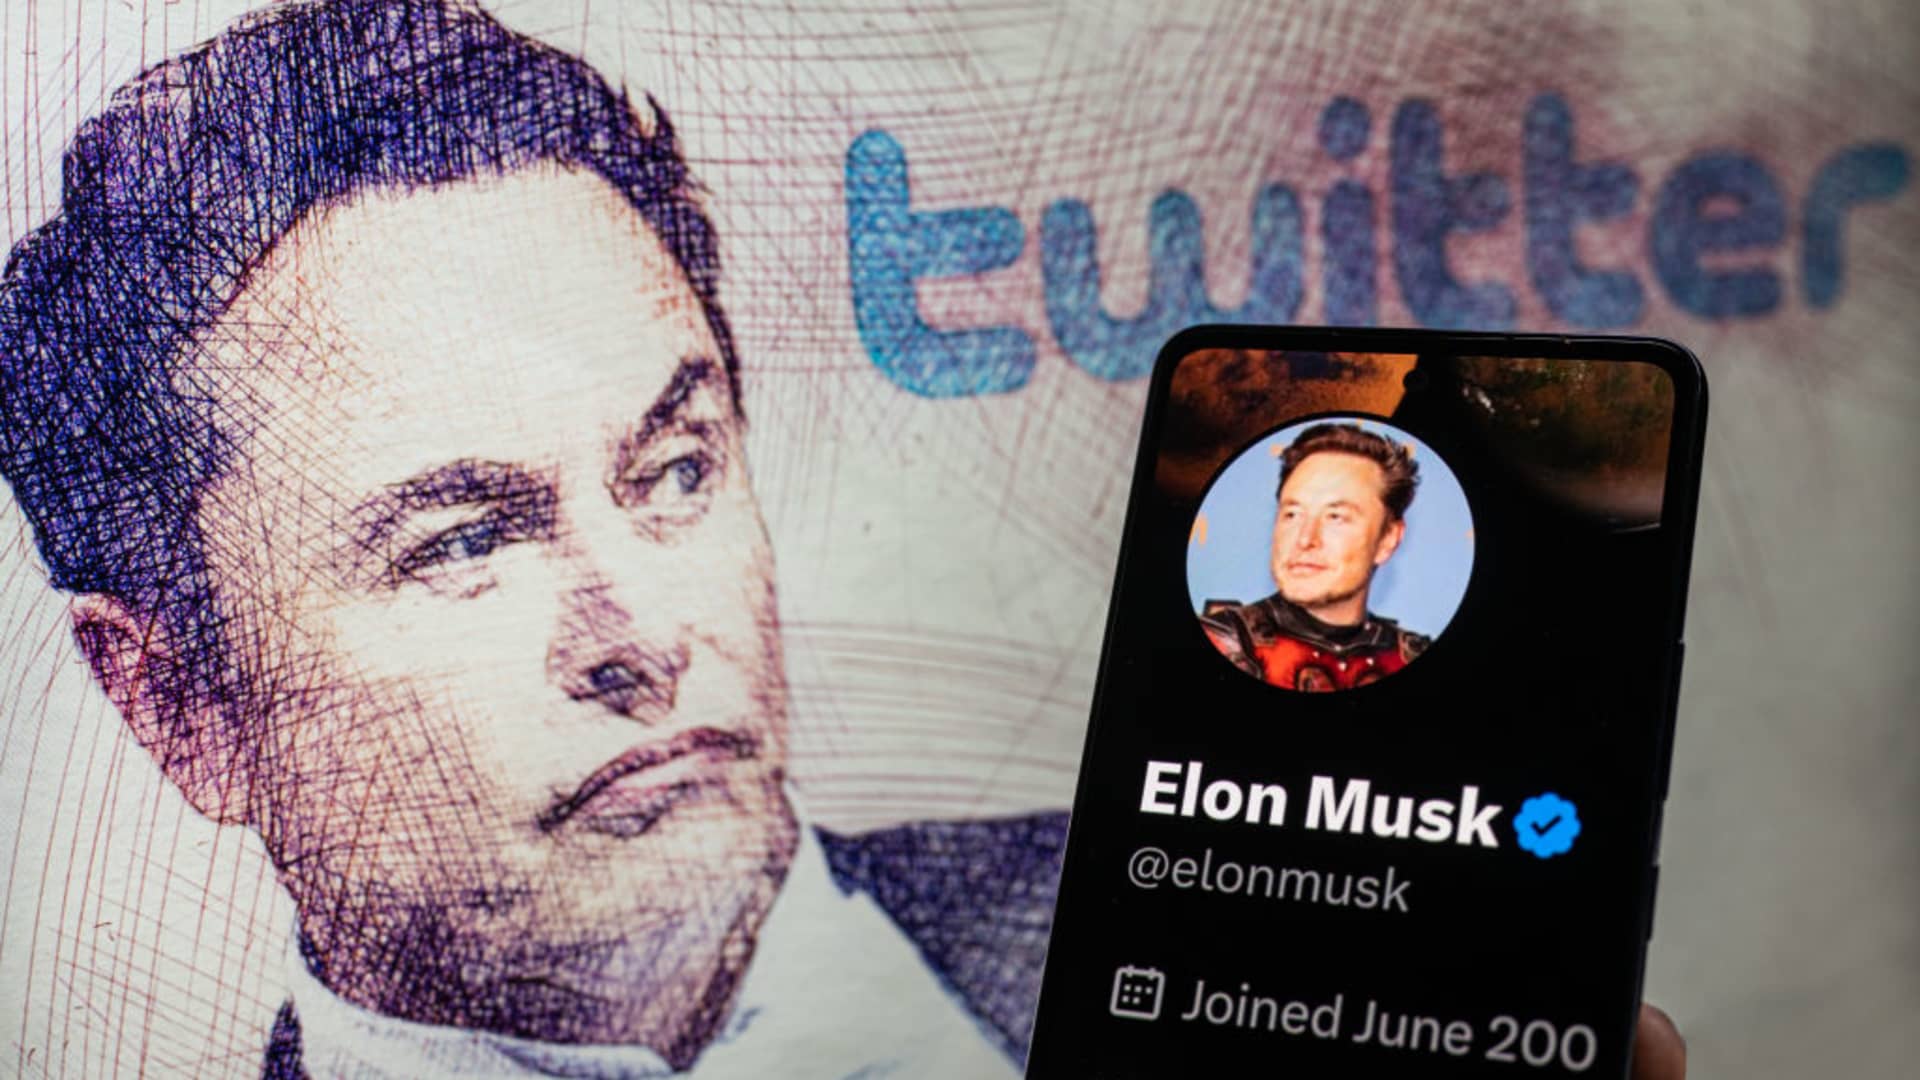 Elon Musk says Twitter takeover has been 'painful' but the company is now 'roughly breakeven'